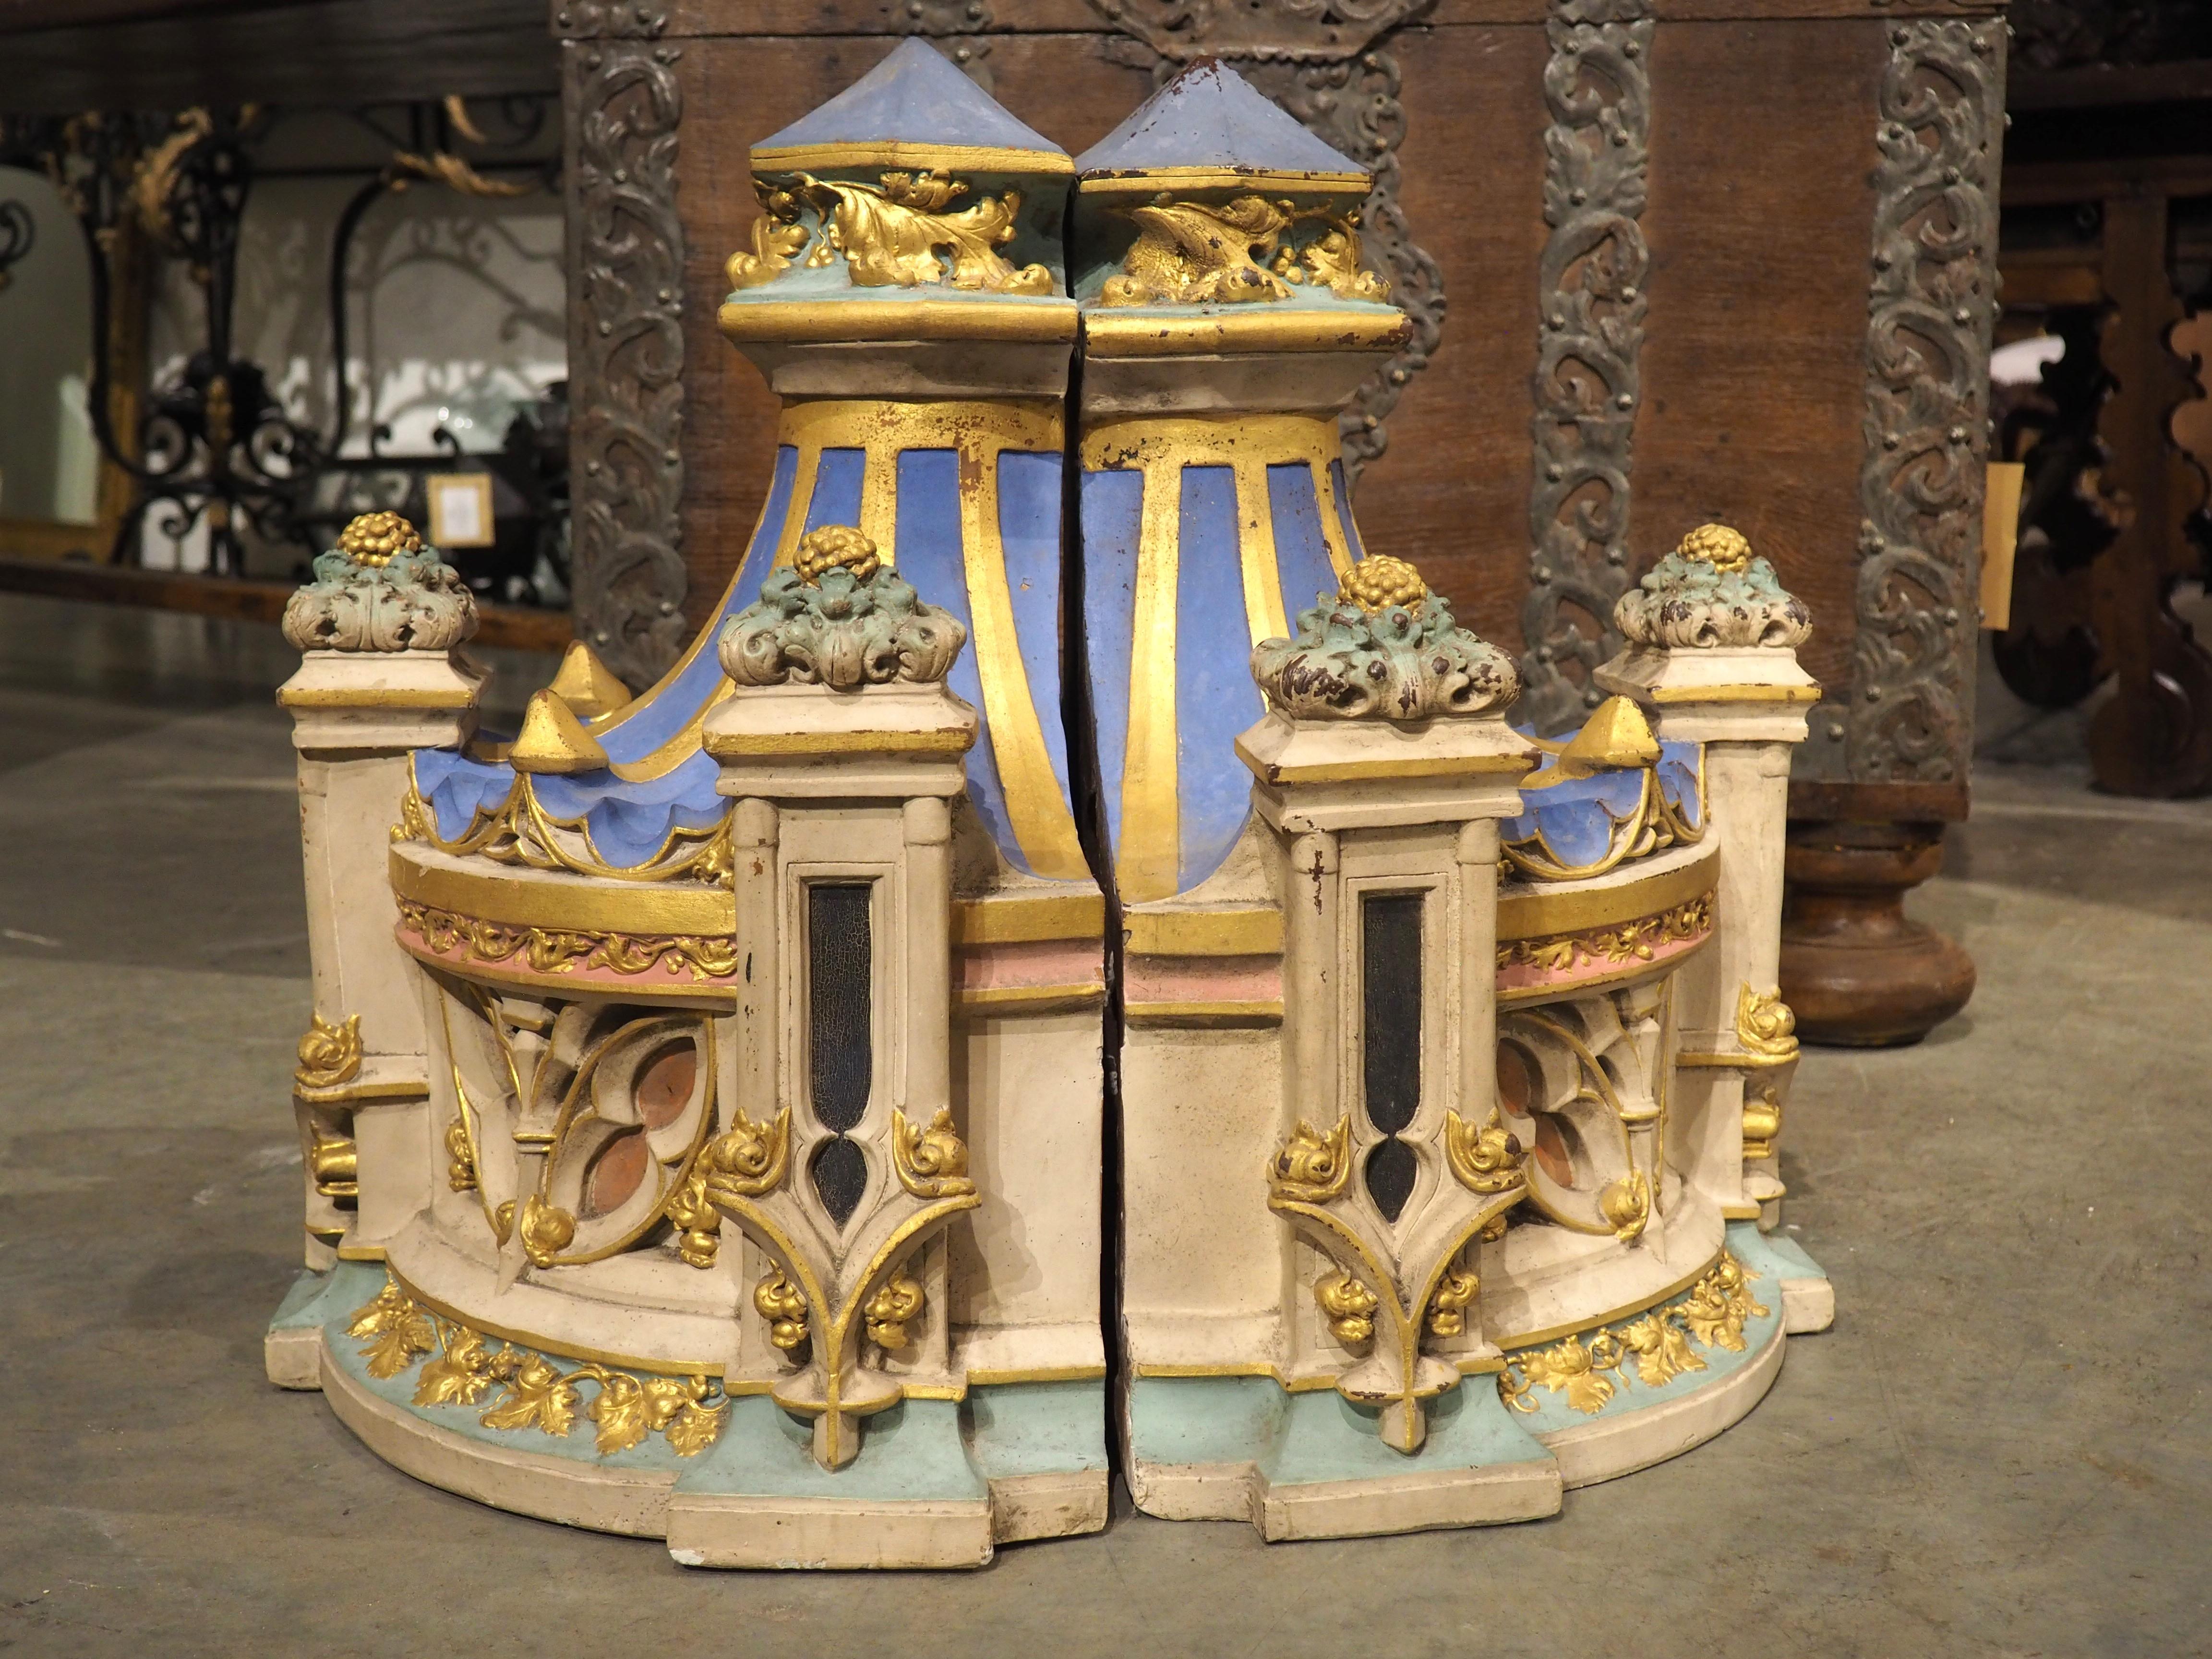 Recently discovered in a secluded private chapel nestled within the enchanting Loire Valley in central France, this remarkable pair of mid-19th century polychrome terra cotta architecturals or wall consoles were made in the Gothic-style marquees.